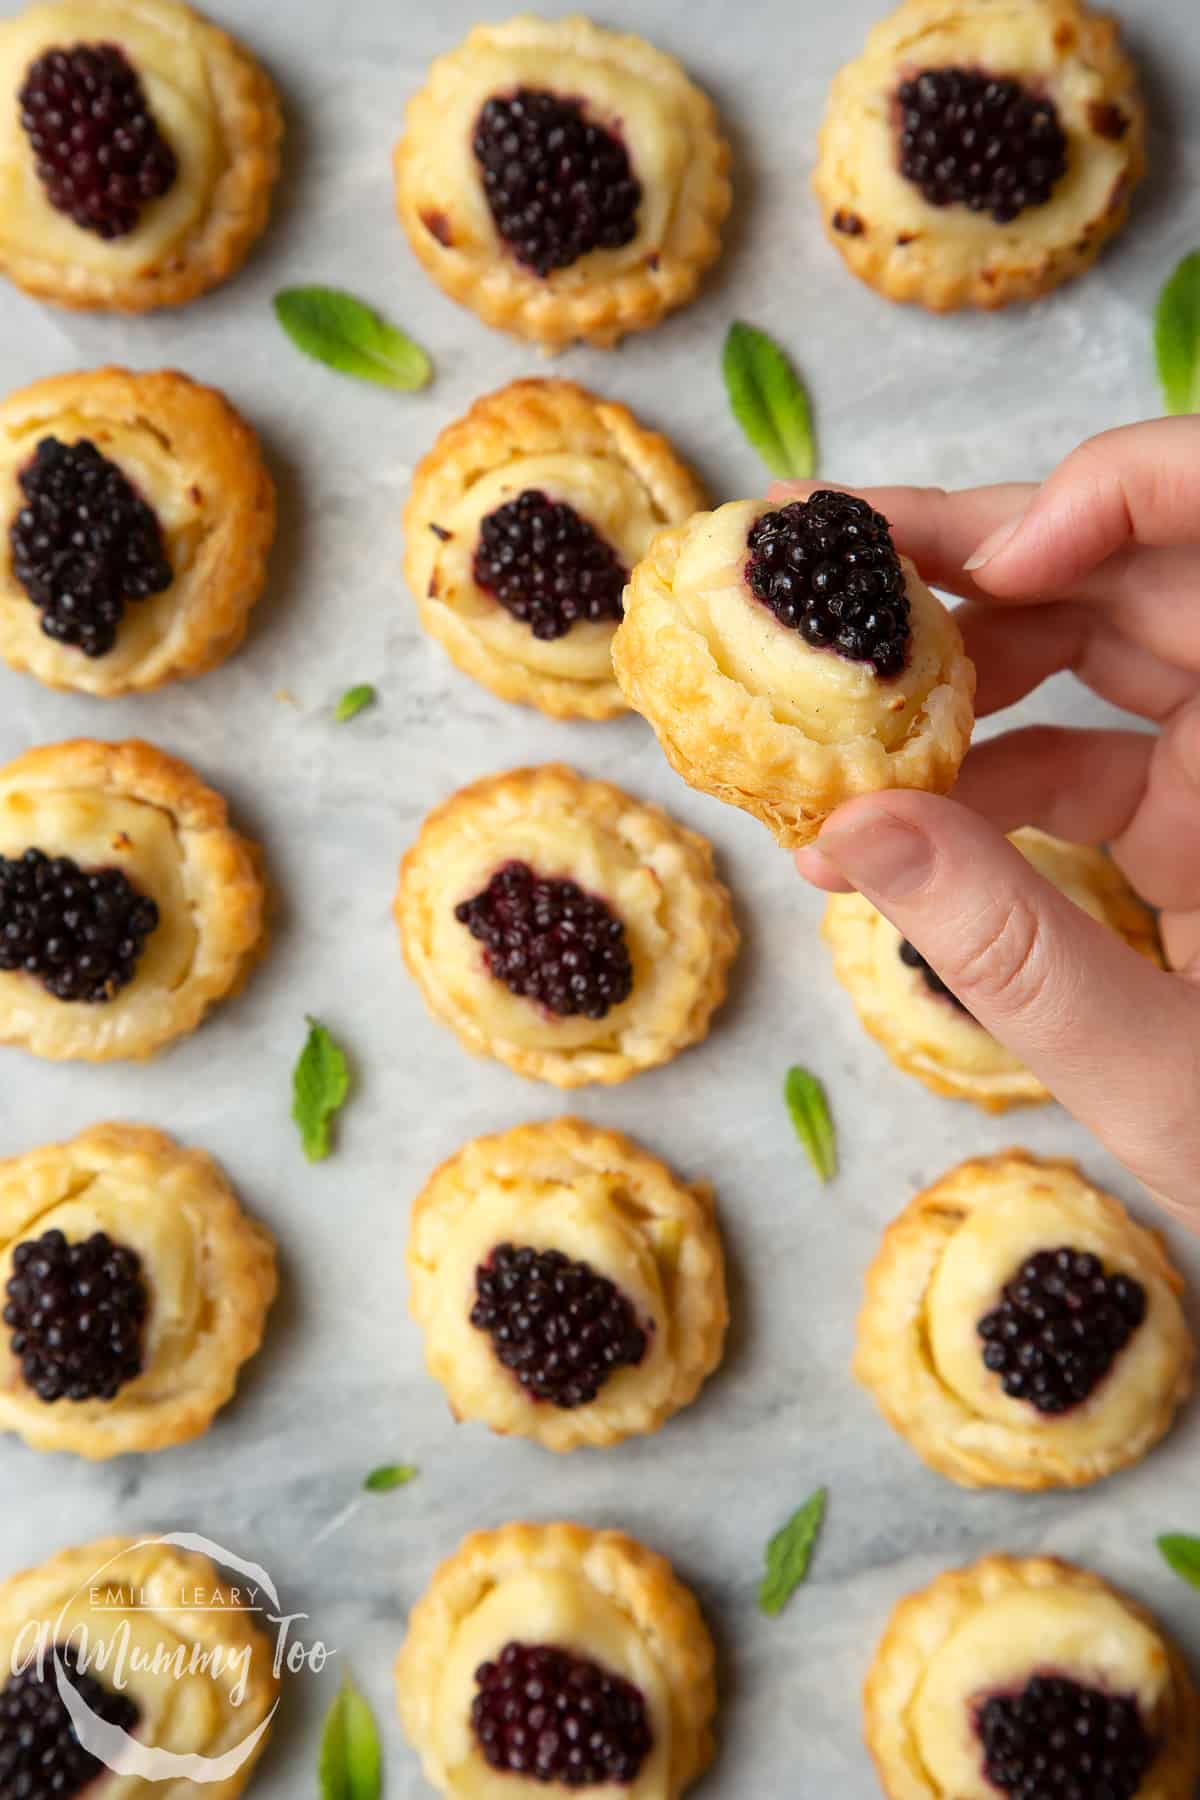 Sixteen blackberry tartlets comprised of a small puff pastry disc topped with sliced apple, pastry cream and a blackberry sit on a marble board with tiny mint leaves scattered around them. A hand holds one of the tarts. 